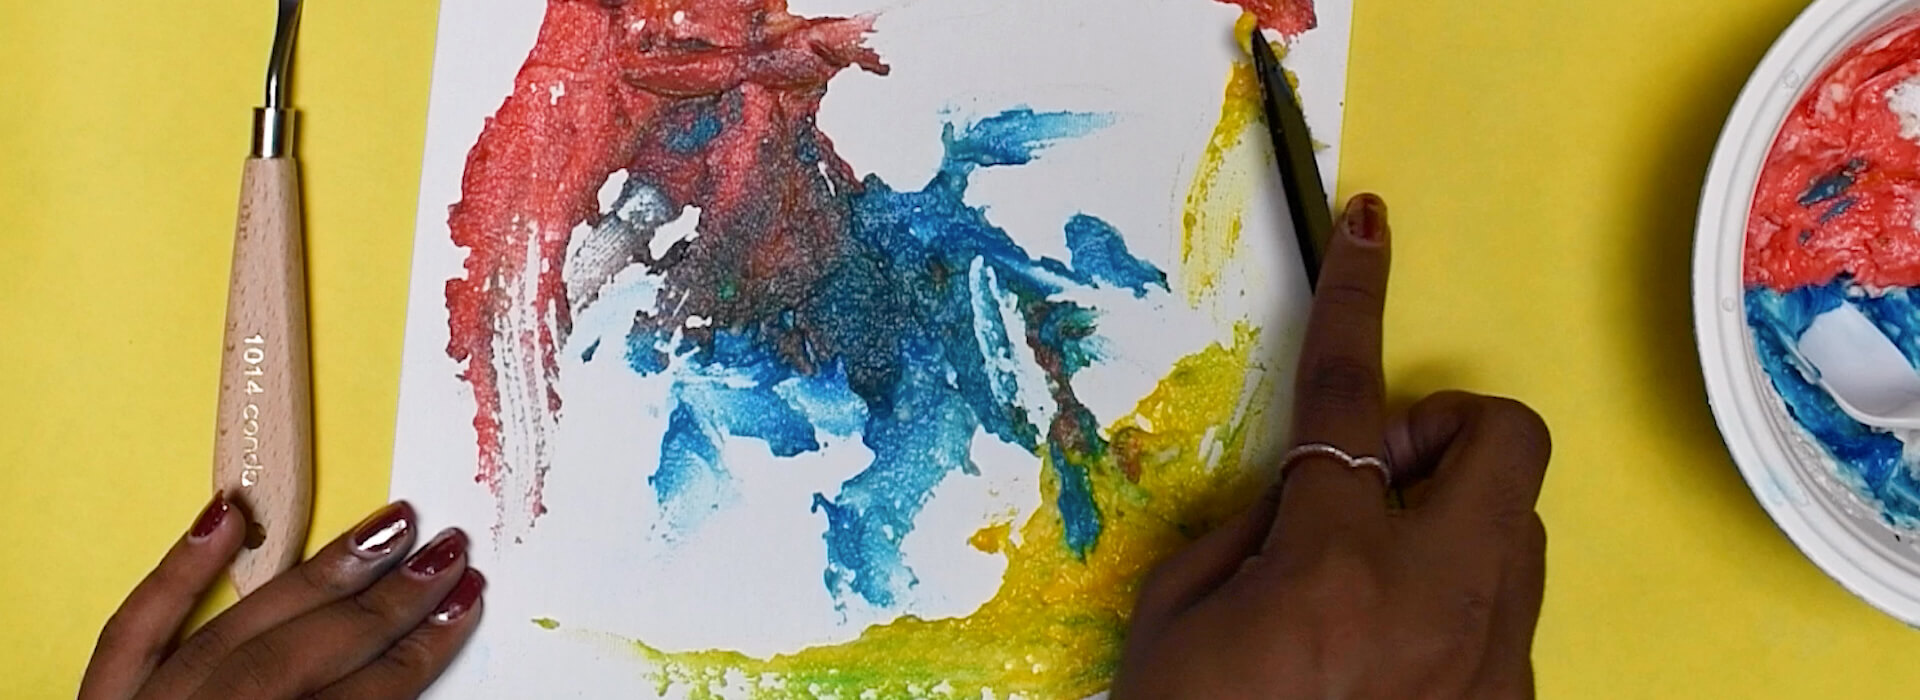 Looking down at a woman's hands as she uses a knife to paint paper with colorful paints